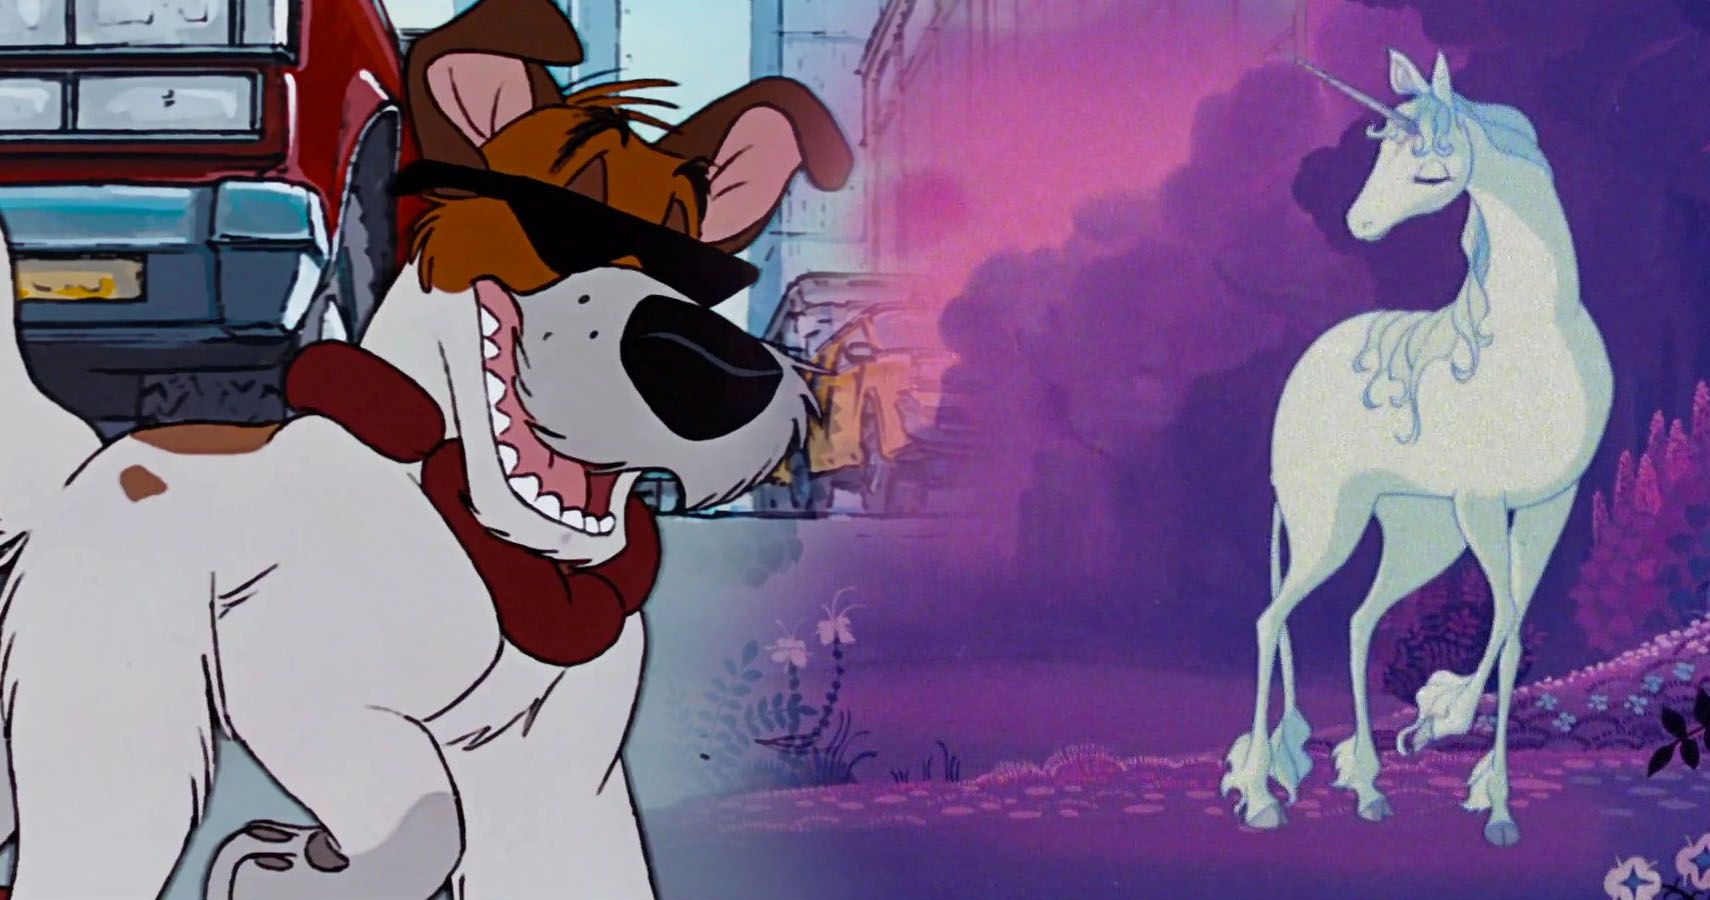 9 Underrated '80s Animated Movies Worth Re-Watching | CBR